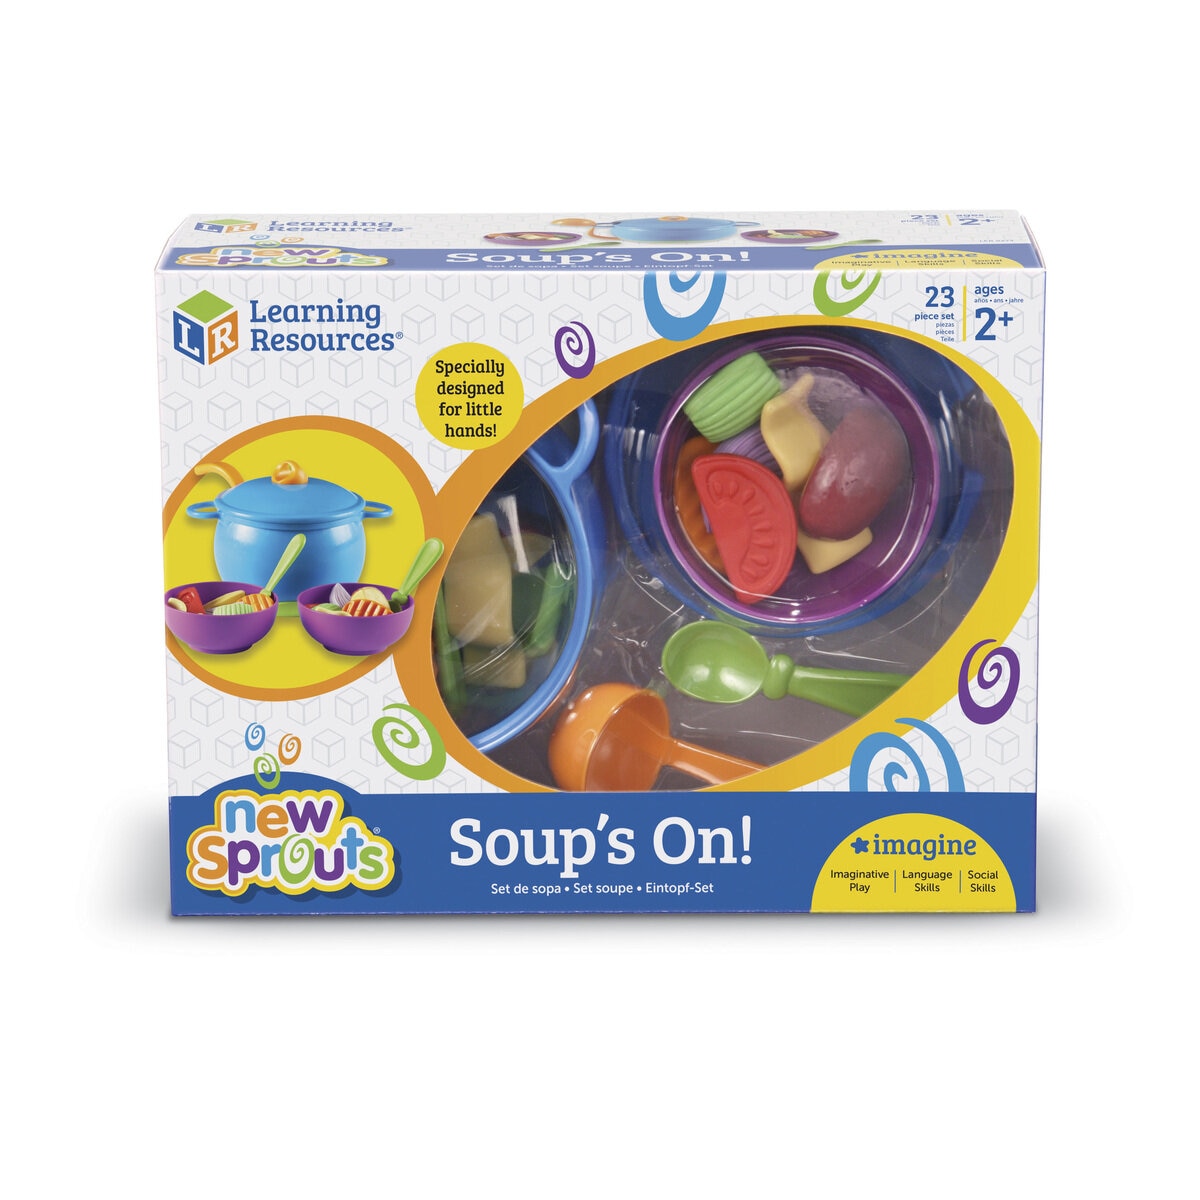 Learning Resources New Sprouts Soup's On!